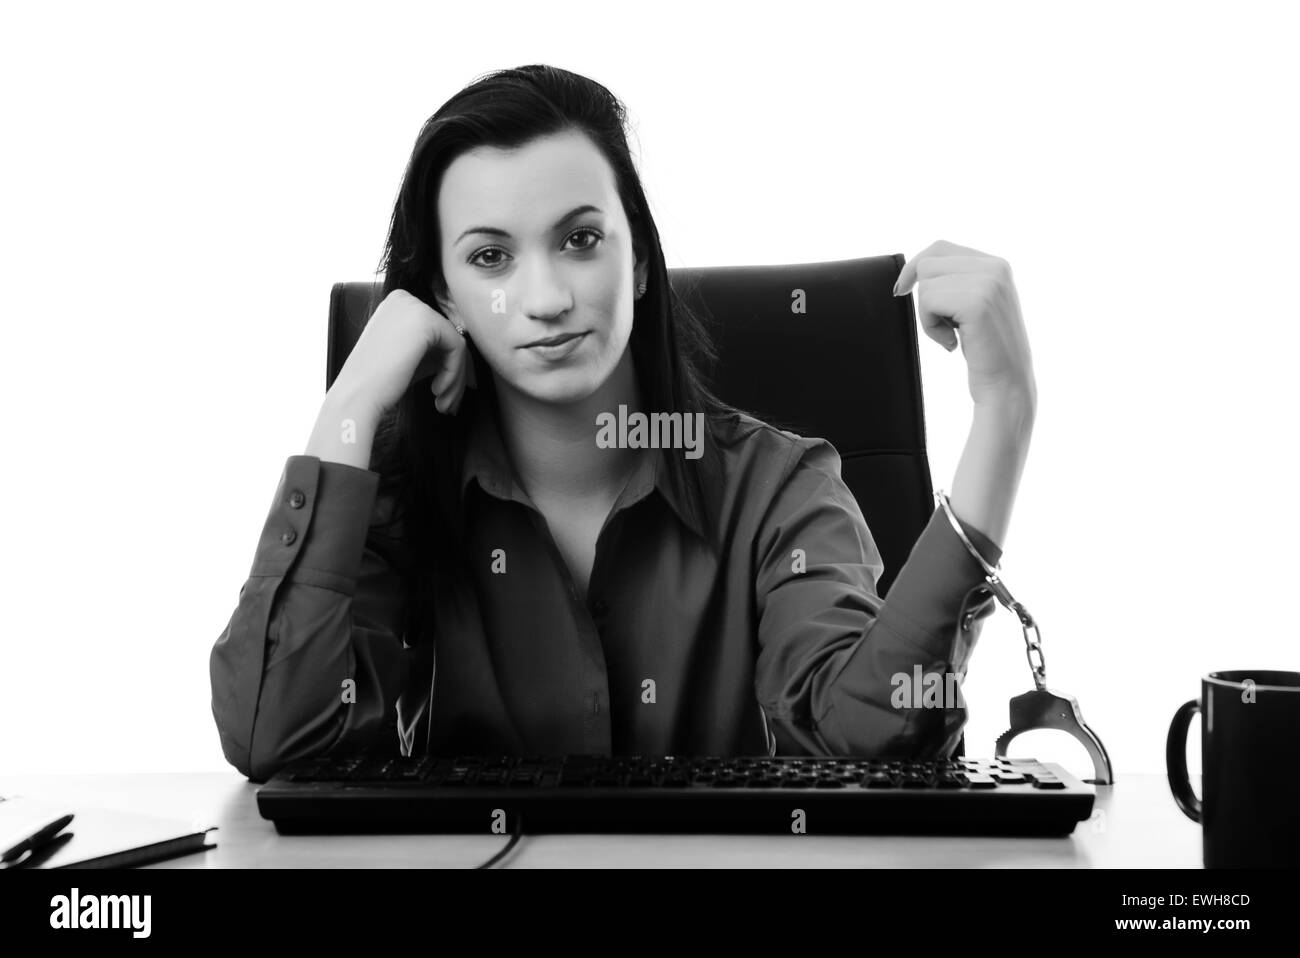 Woman Locked Up To Her Desk At Work Stock Photo 84587677 Alamy